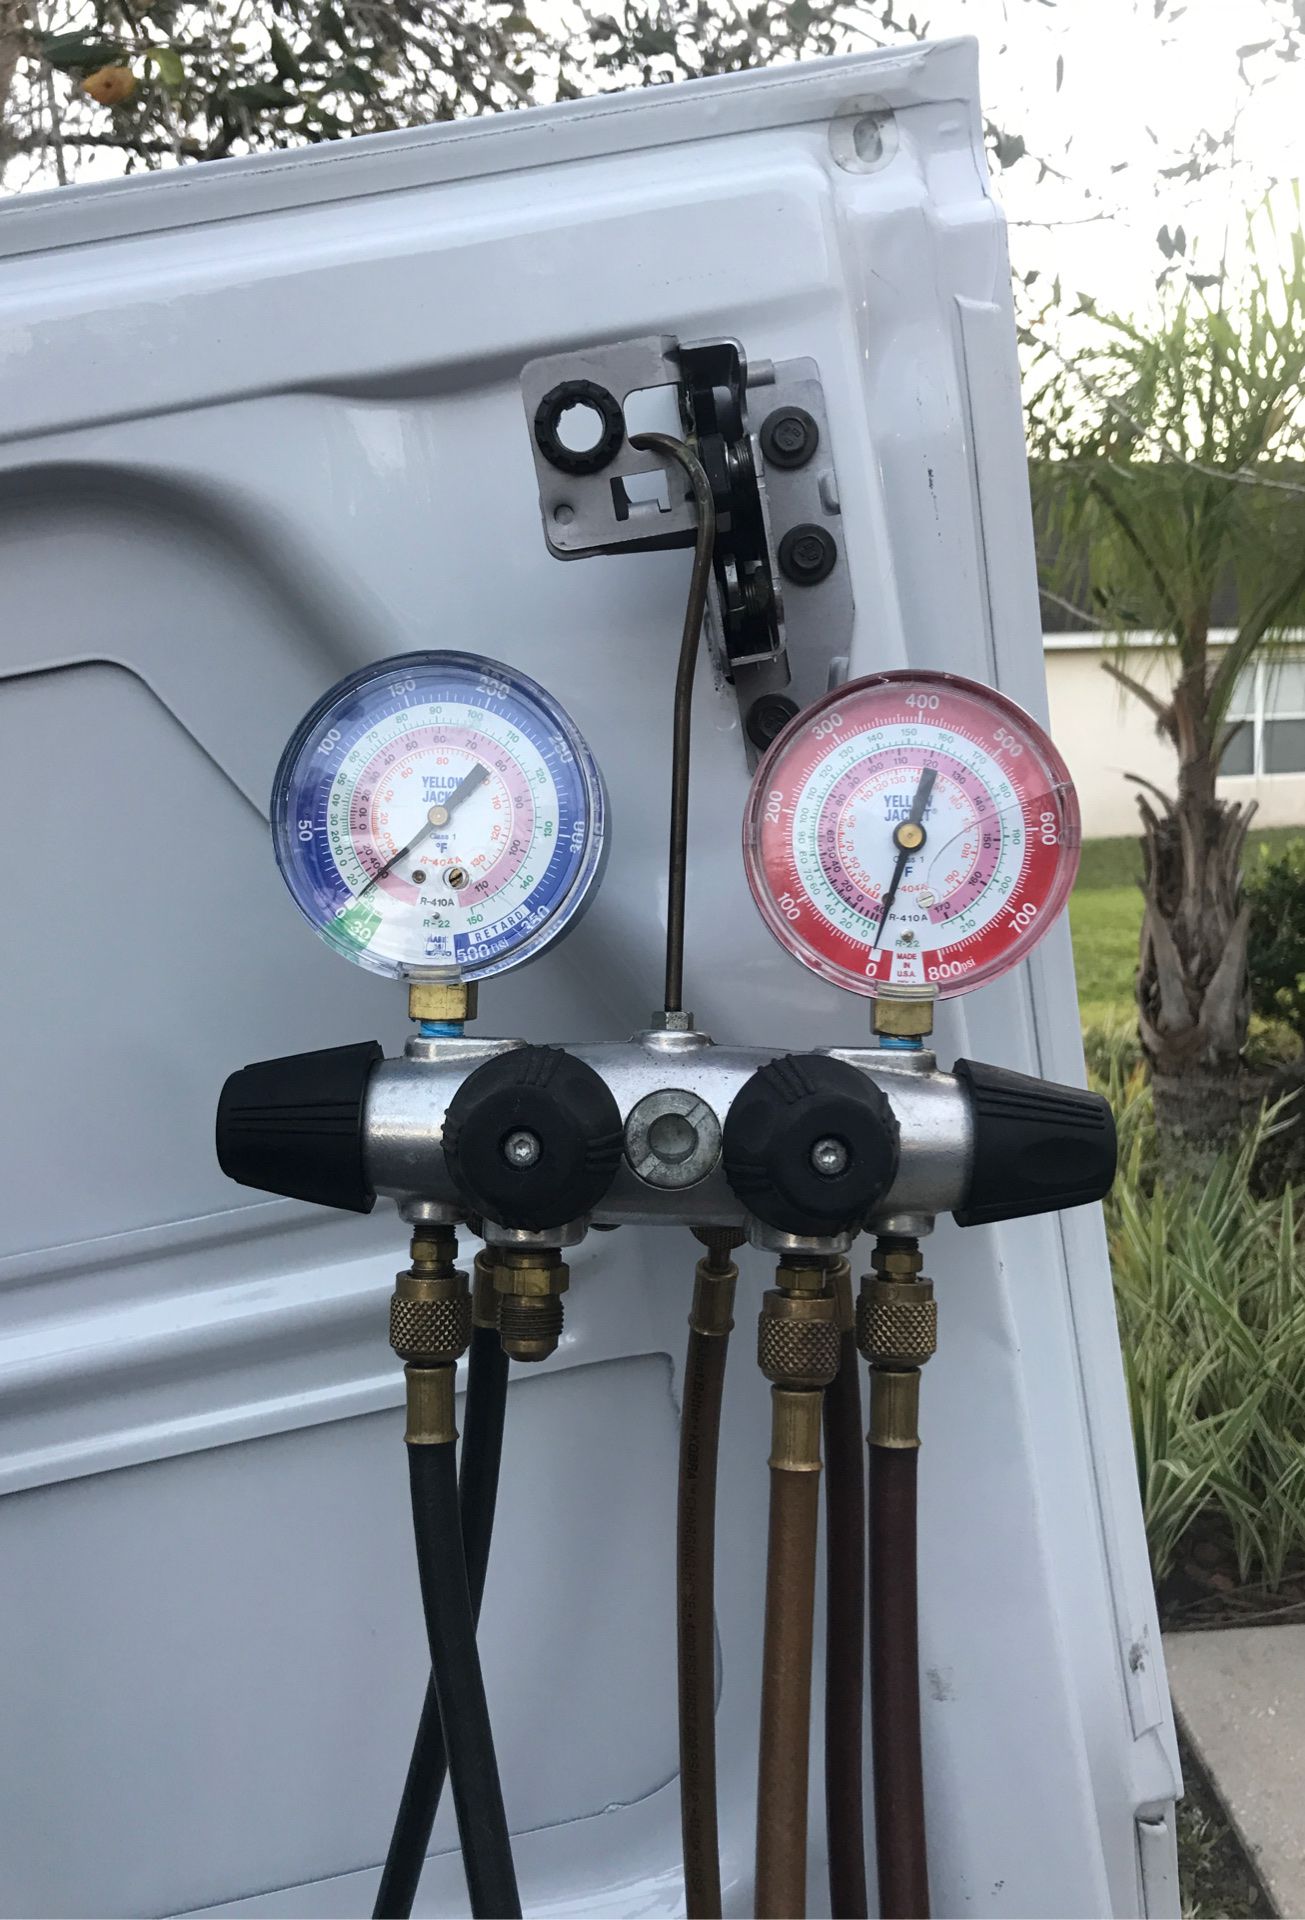 4 port manifold with yellow jacket gauges slightly use pressure tested